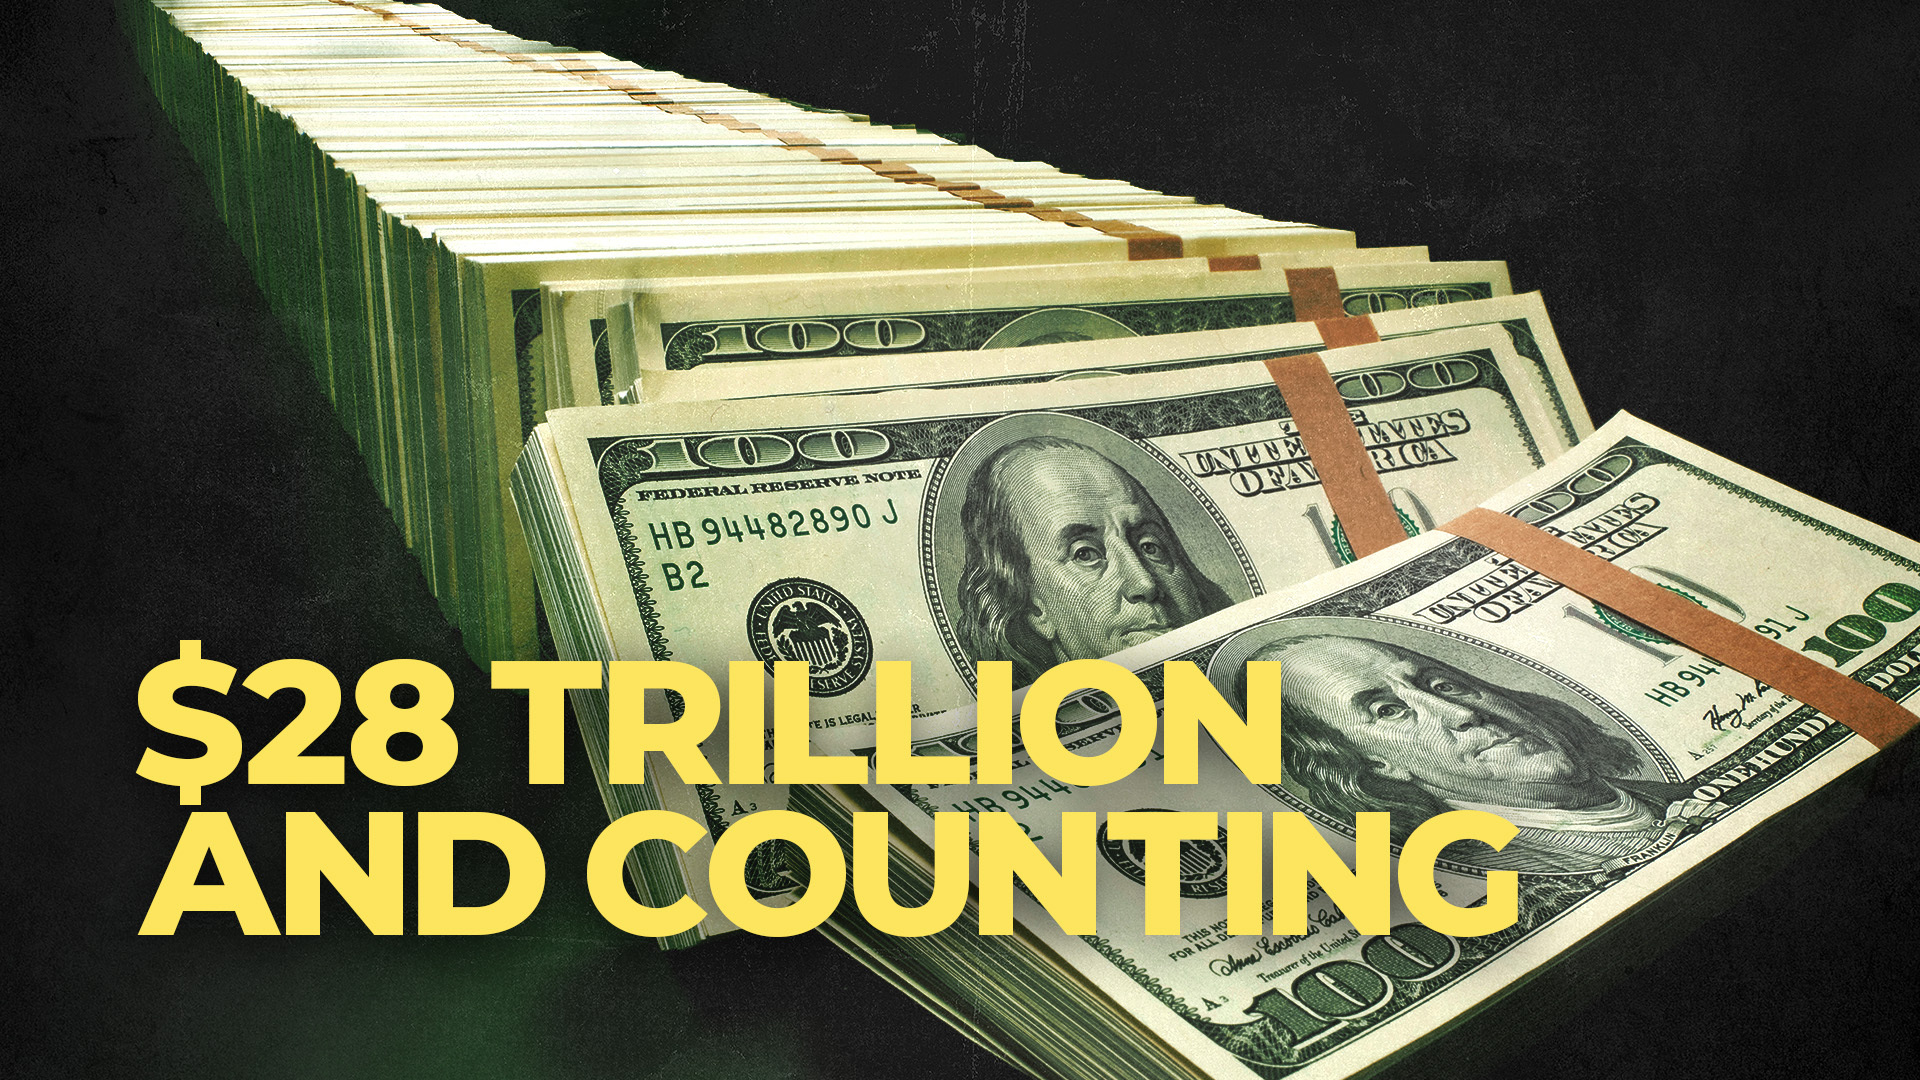 As America faces a constantly climbing national debt figure, some economists argue that  trillion just a number that doesn't matter.